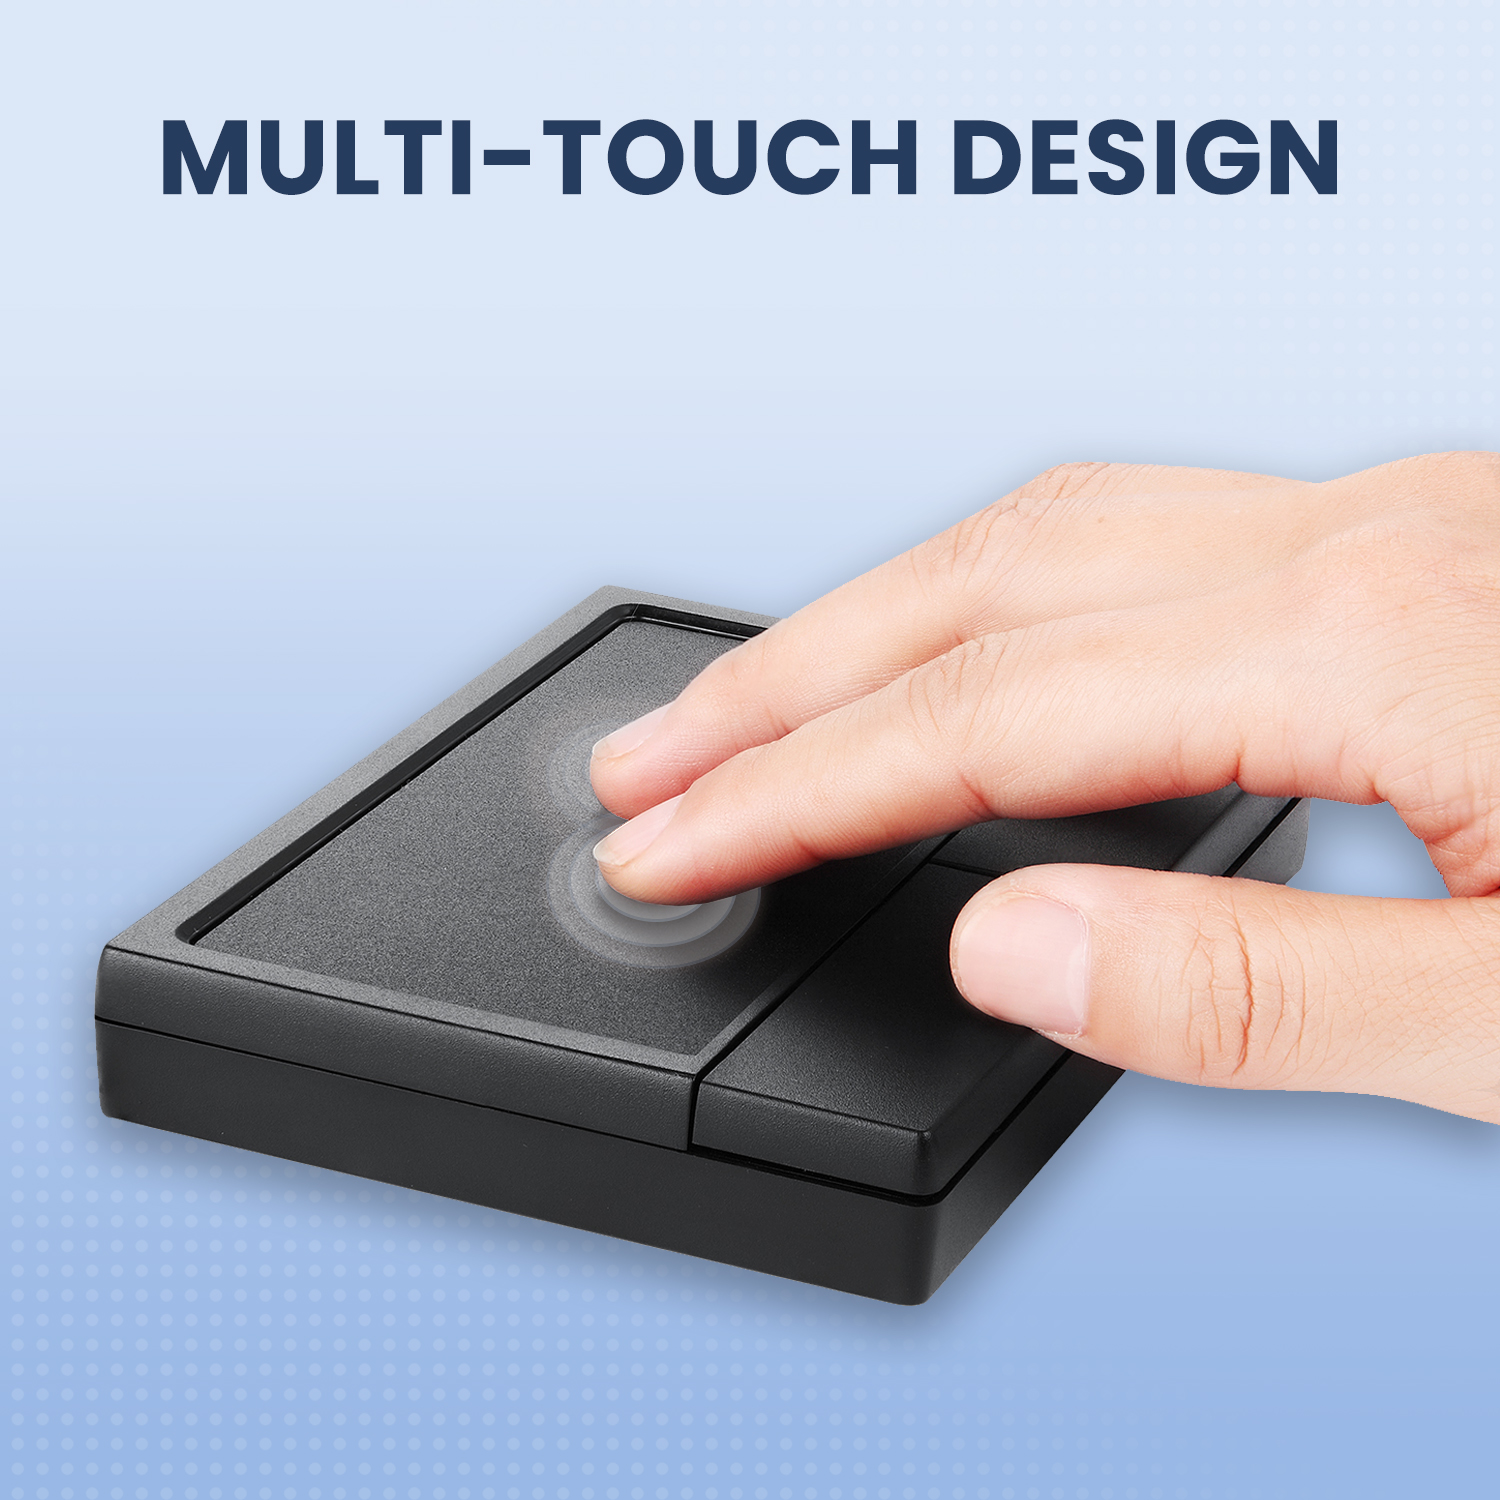 Multi-Touch Gestures